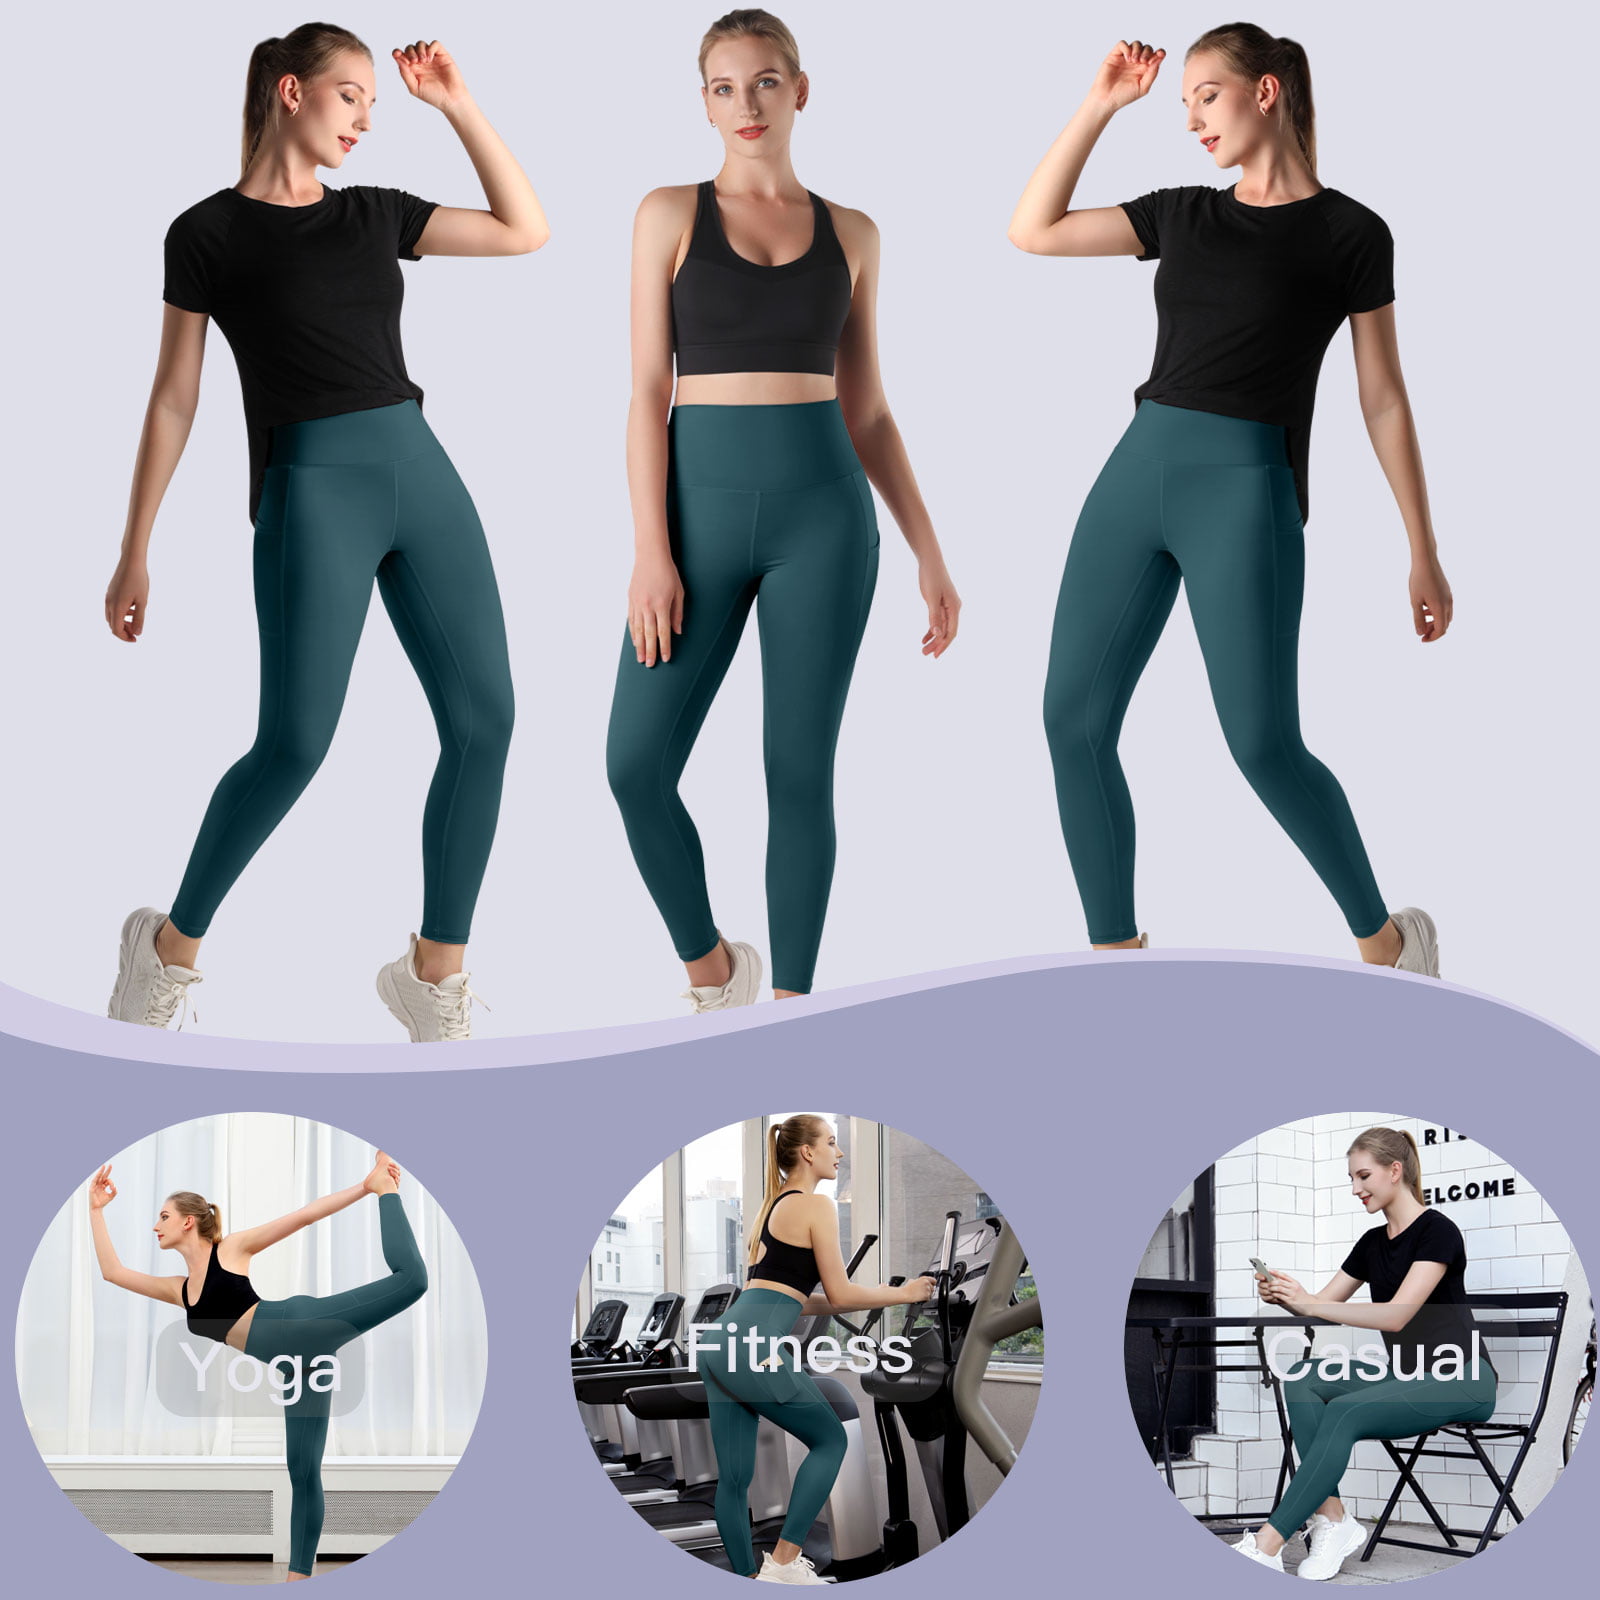 Outlet Clearance Today Sales Cargo Leggings with Pockets for Women  High Waisted Tummy Control Leggings Yoga Workout Pants Athletic  Wearlightening Deals Todays Deals in Clearance Army Green at  Women's  Clothing